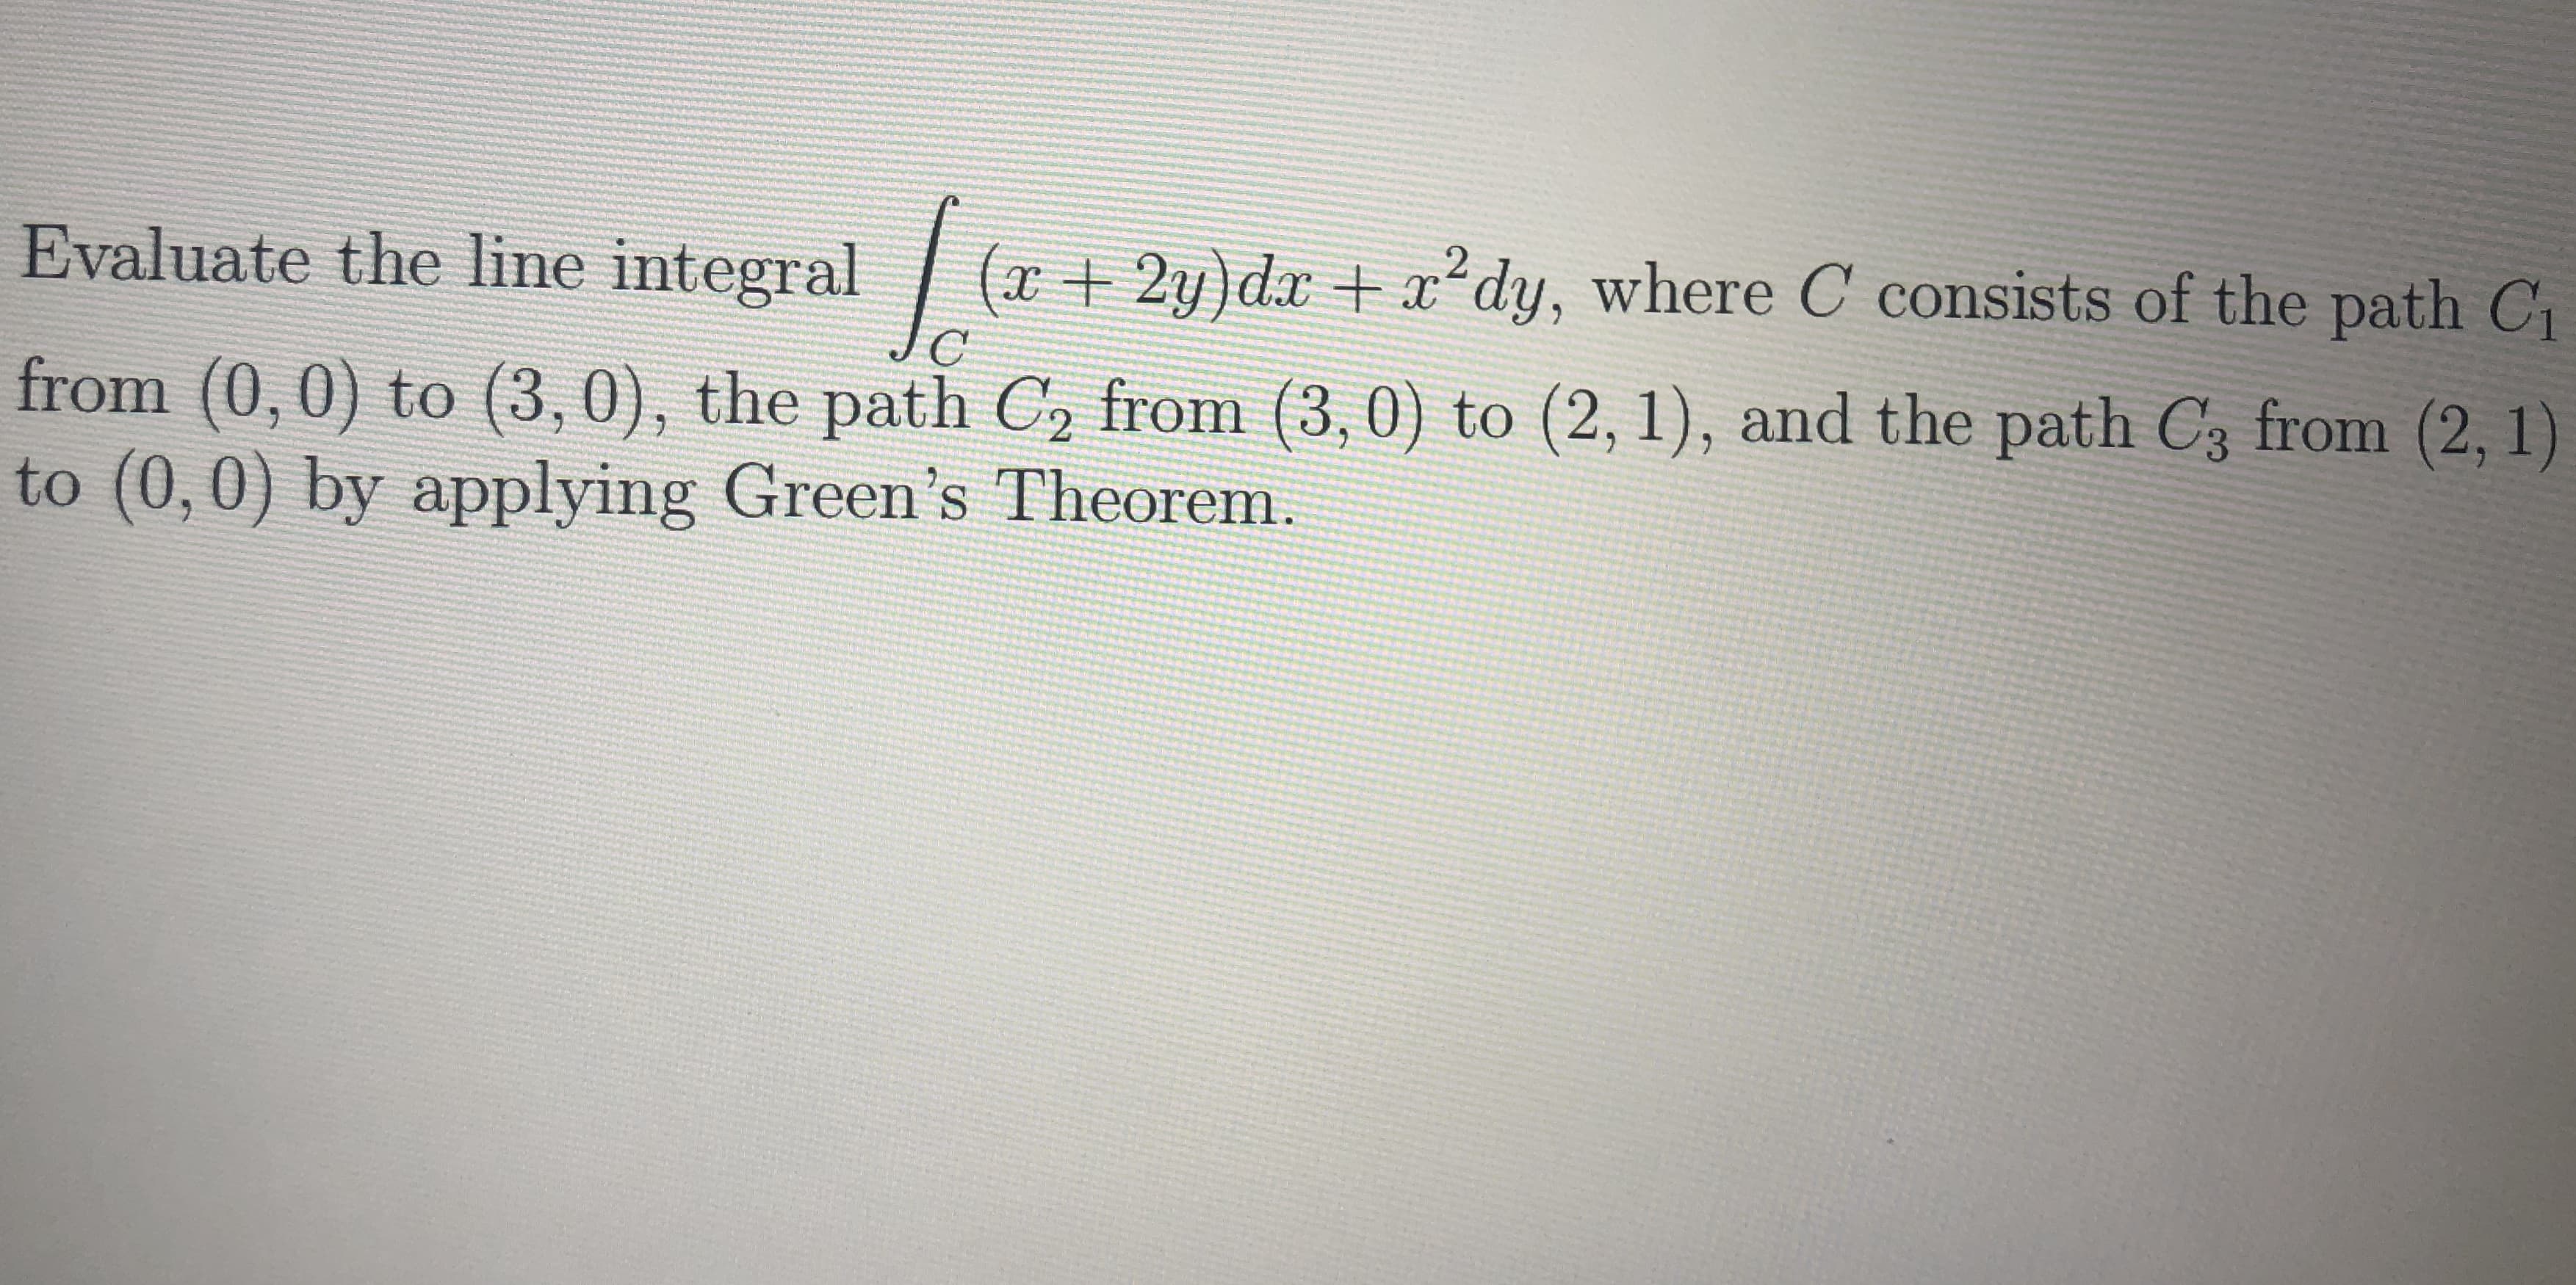 Evaluate the line integral
(x+2y)dx + dy, where C consists of the path C
from (0,0) to (3,0), the path C, from (3,0) to (2, 1), and the path C3 from (2, 1)
to (0,0) by applying Green's Theorem.
